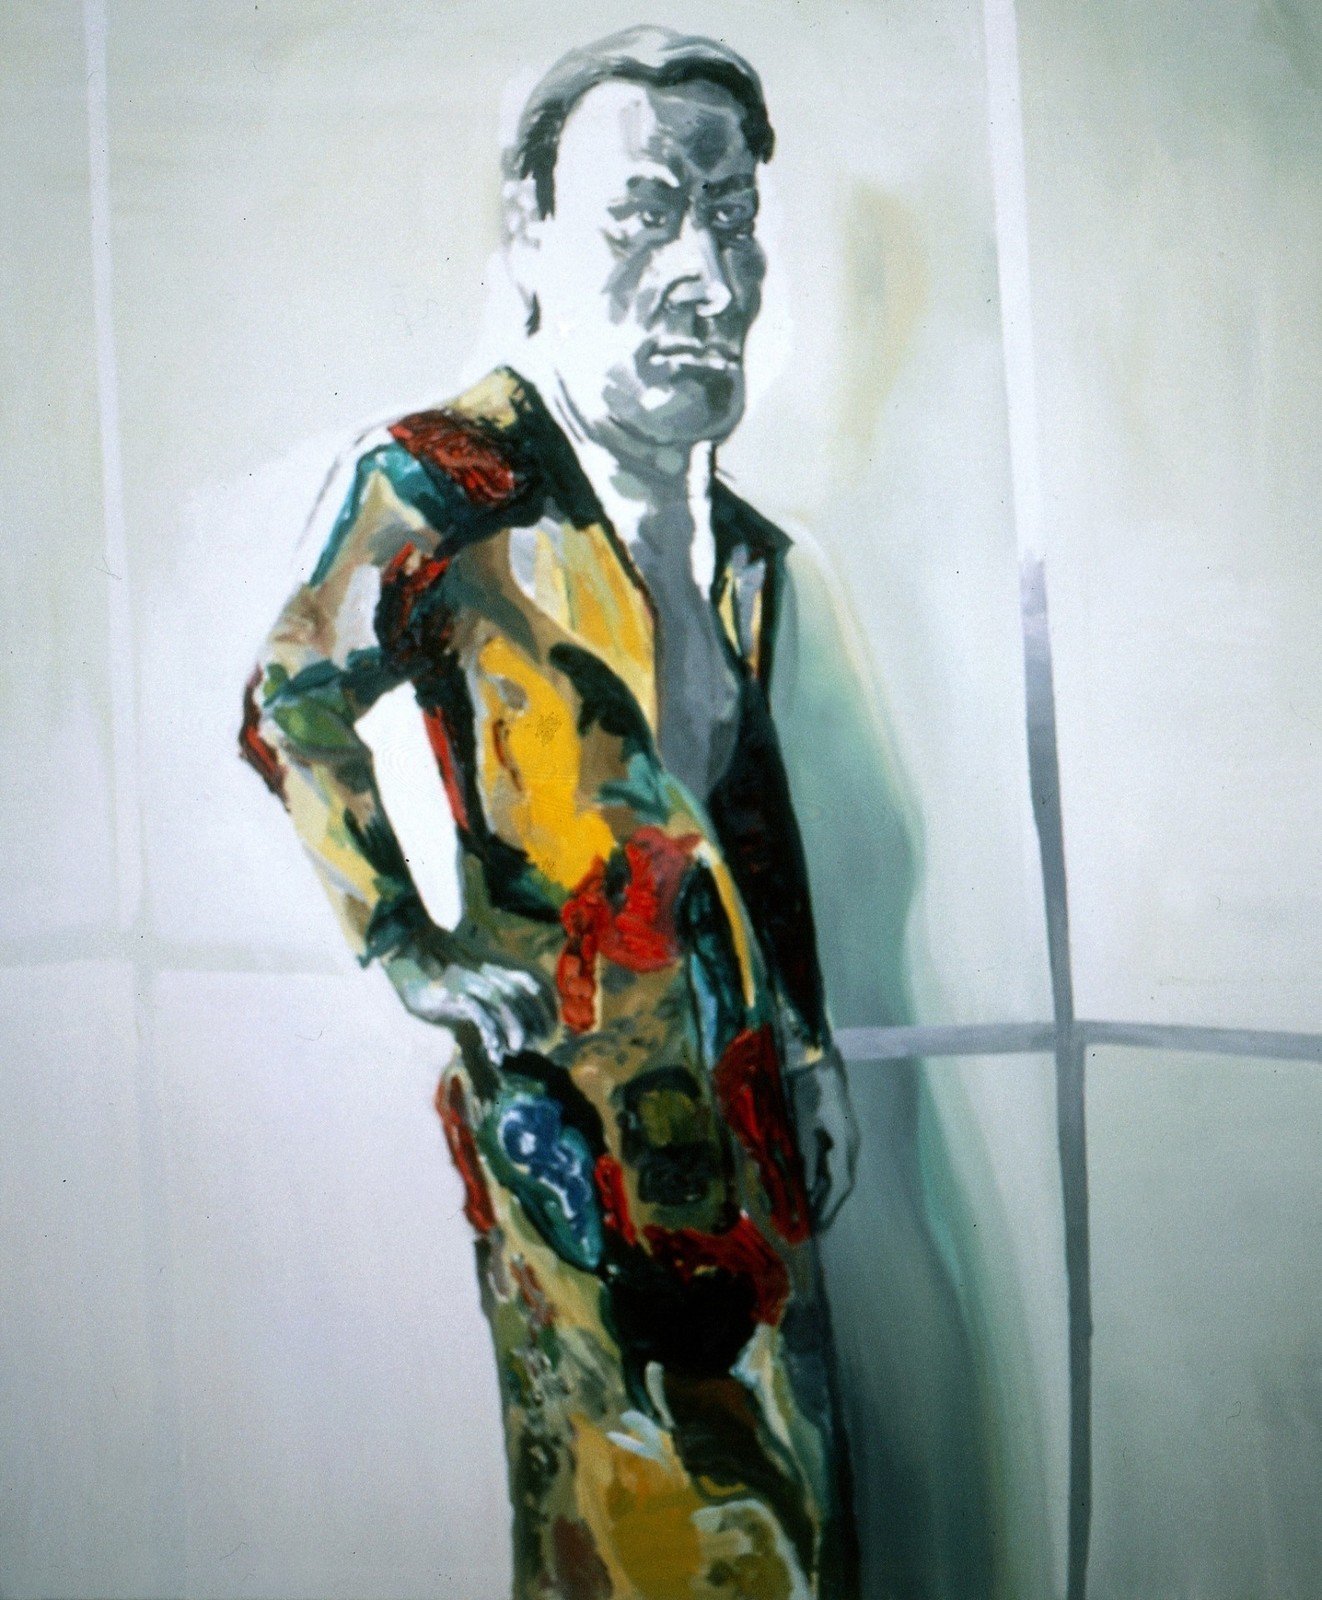 Martin Kippenberger.  Untitled, 1996.  Oil on canvas, 180 x 150 cm  Galerie Gisela Capitain, Cologne, Germany